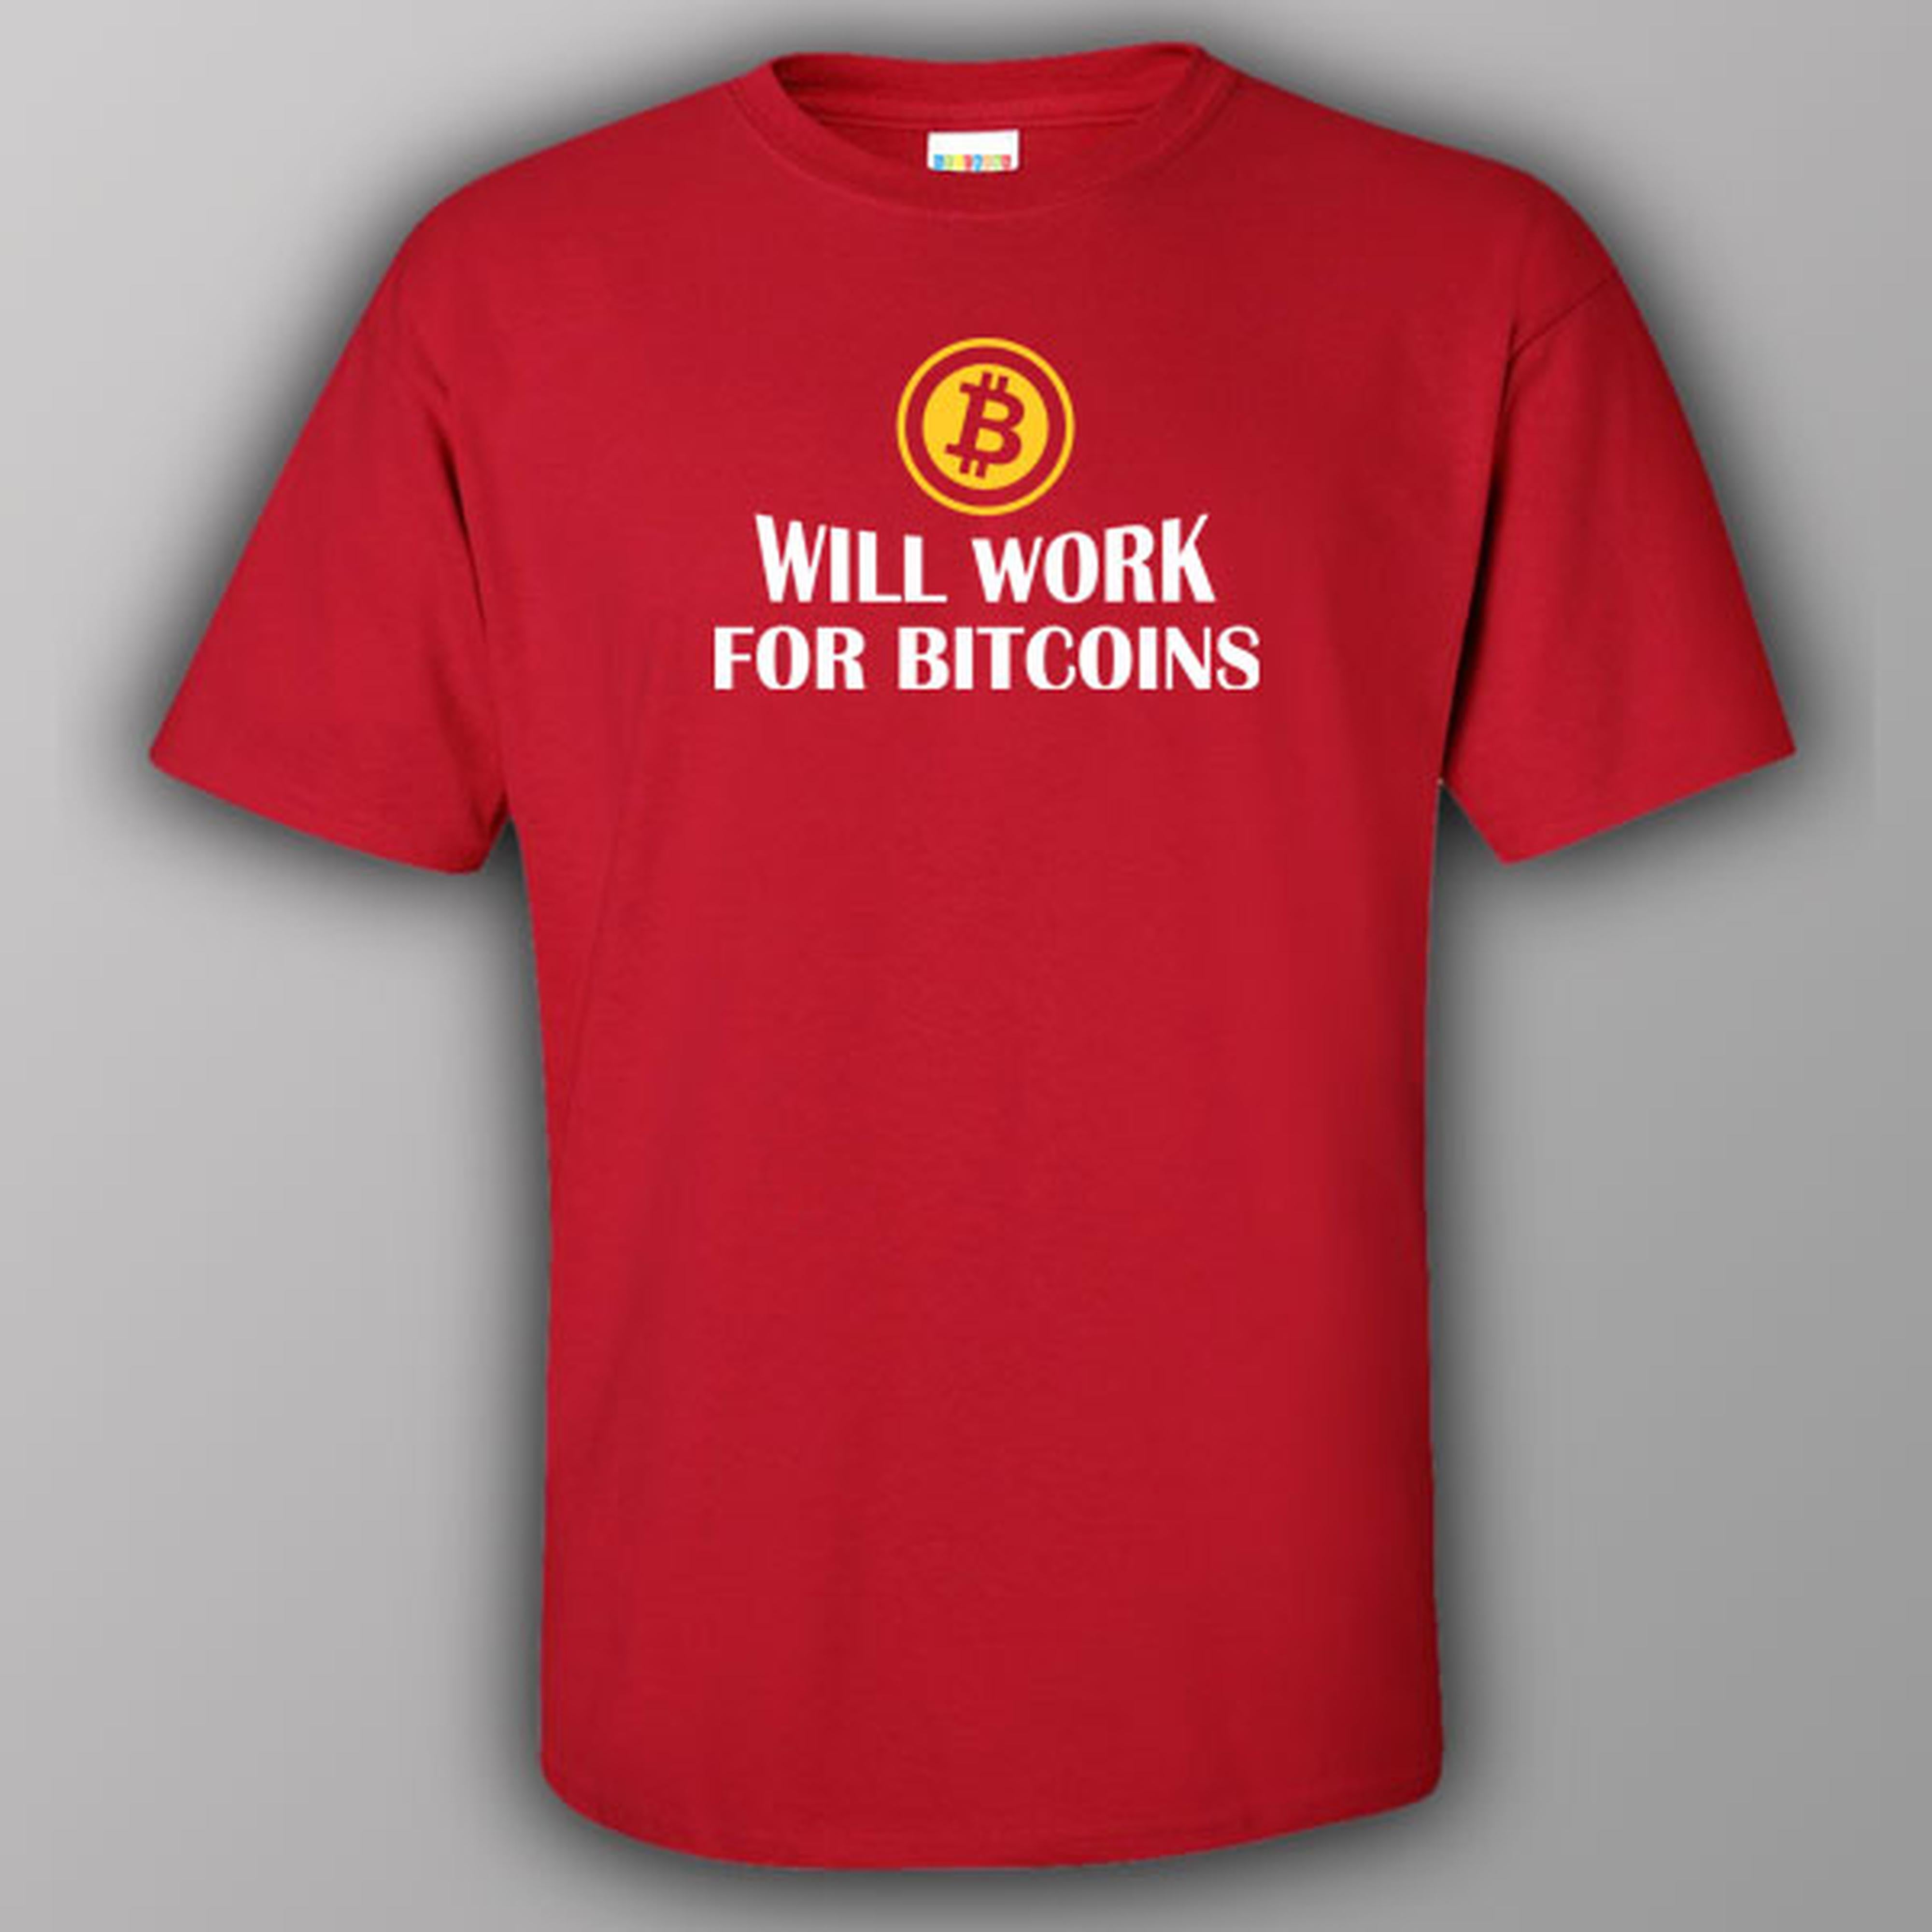 Will work for bitcoins - T-shirt